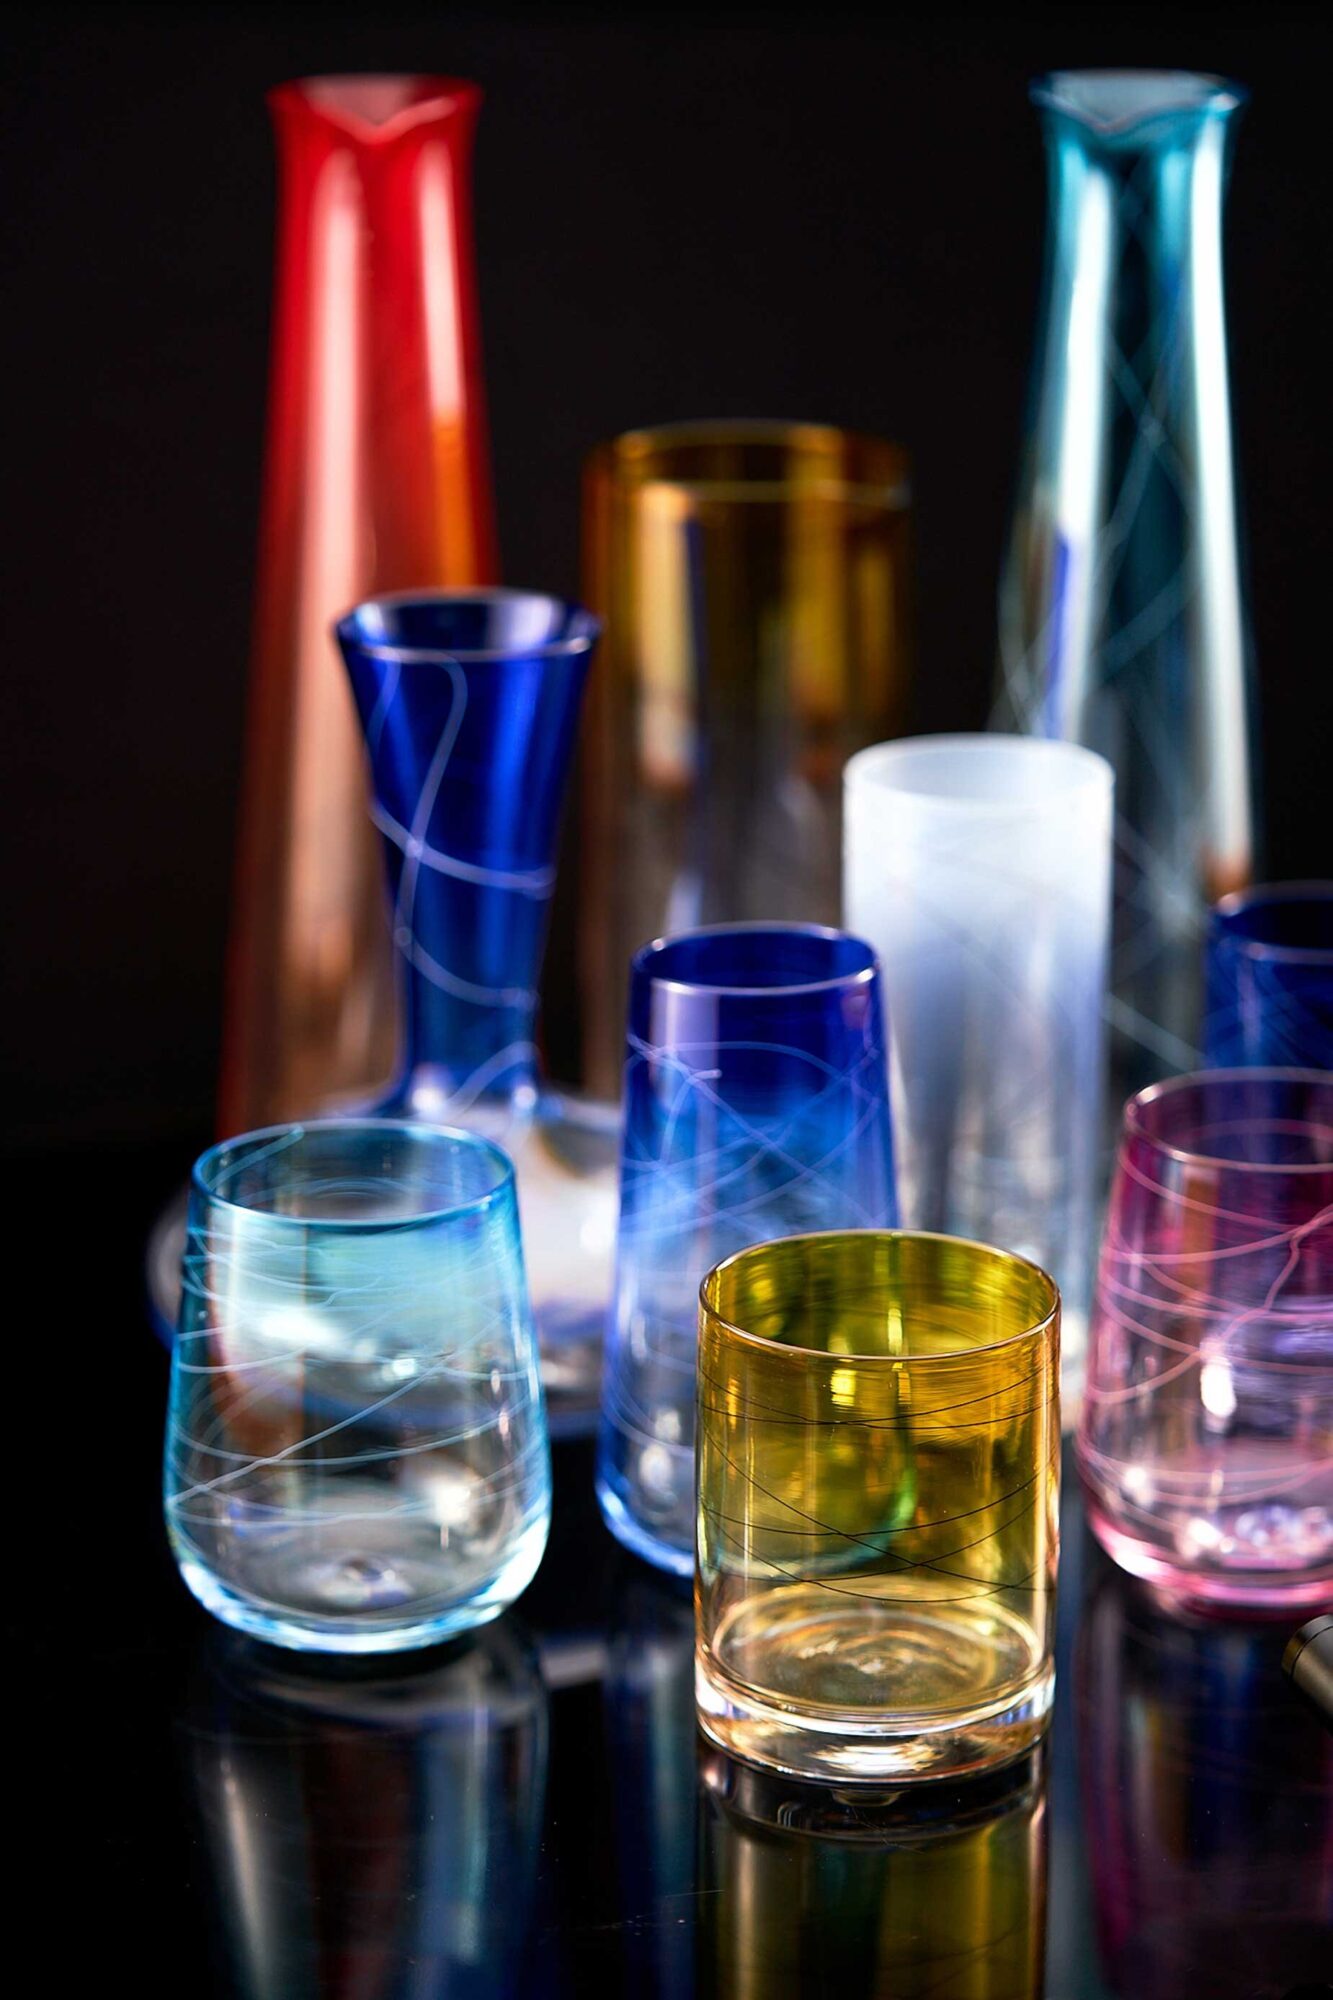  This eye-catching collection of colored glassware by Joseph Webster is made for everyday use. 